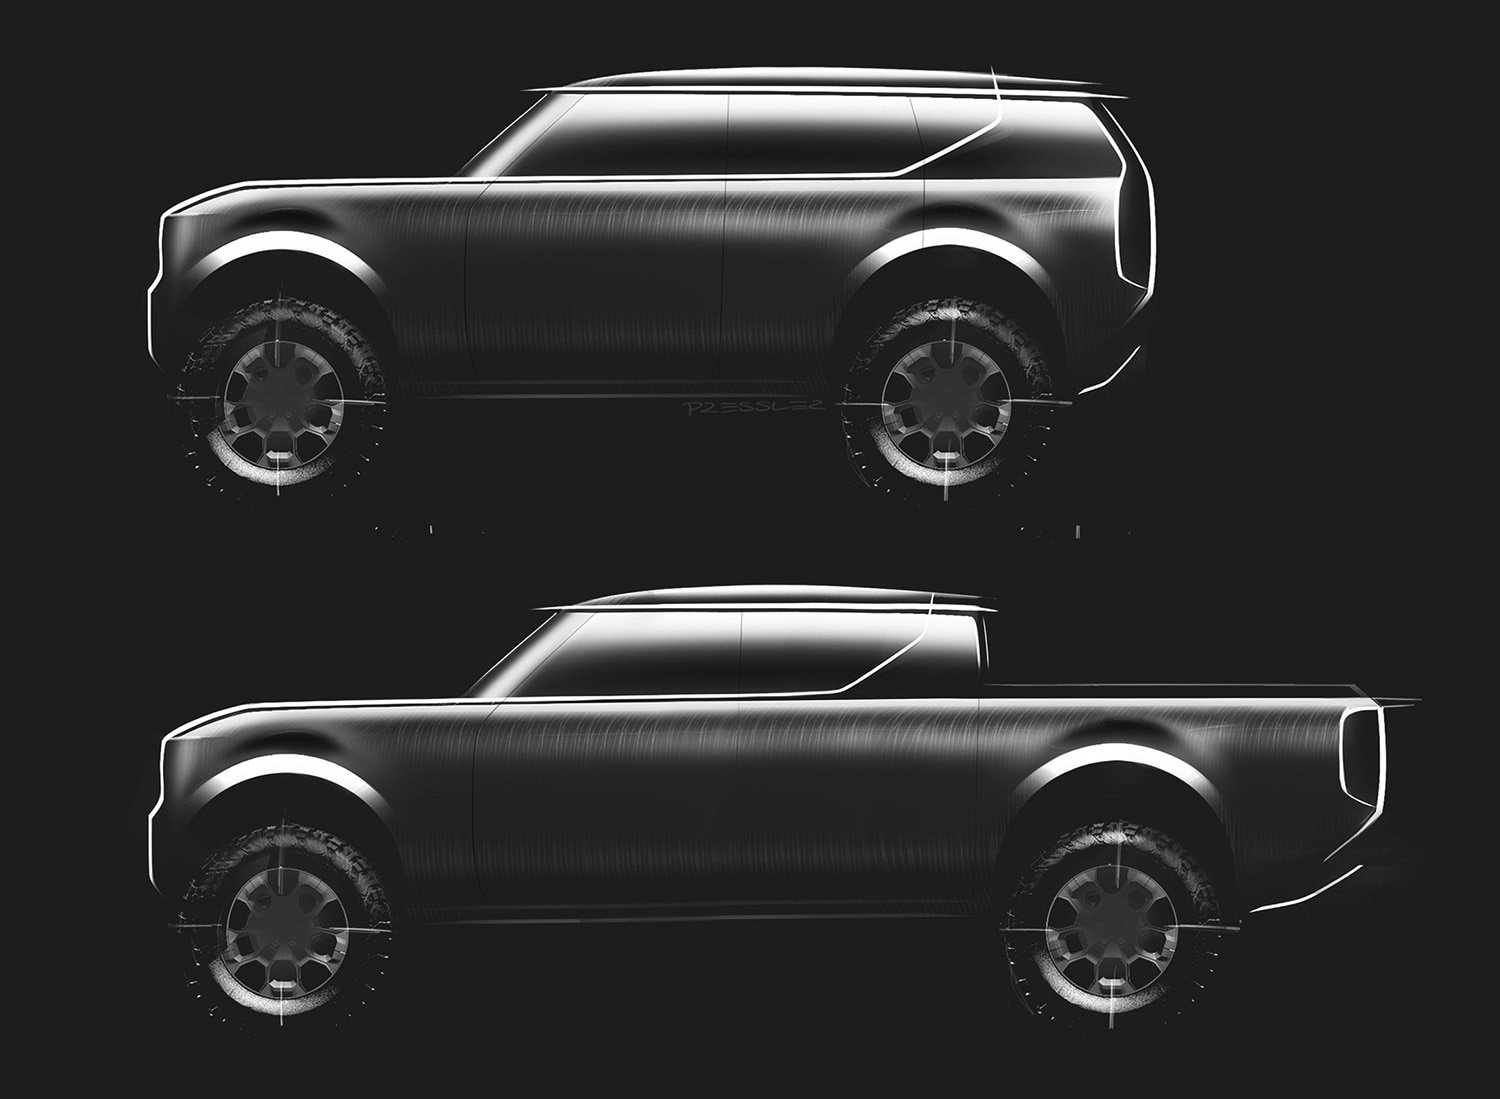 Scout SUV and pickup truck concept sketches, black and white